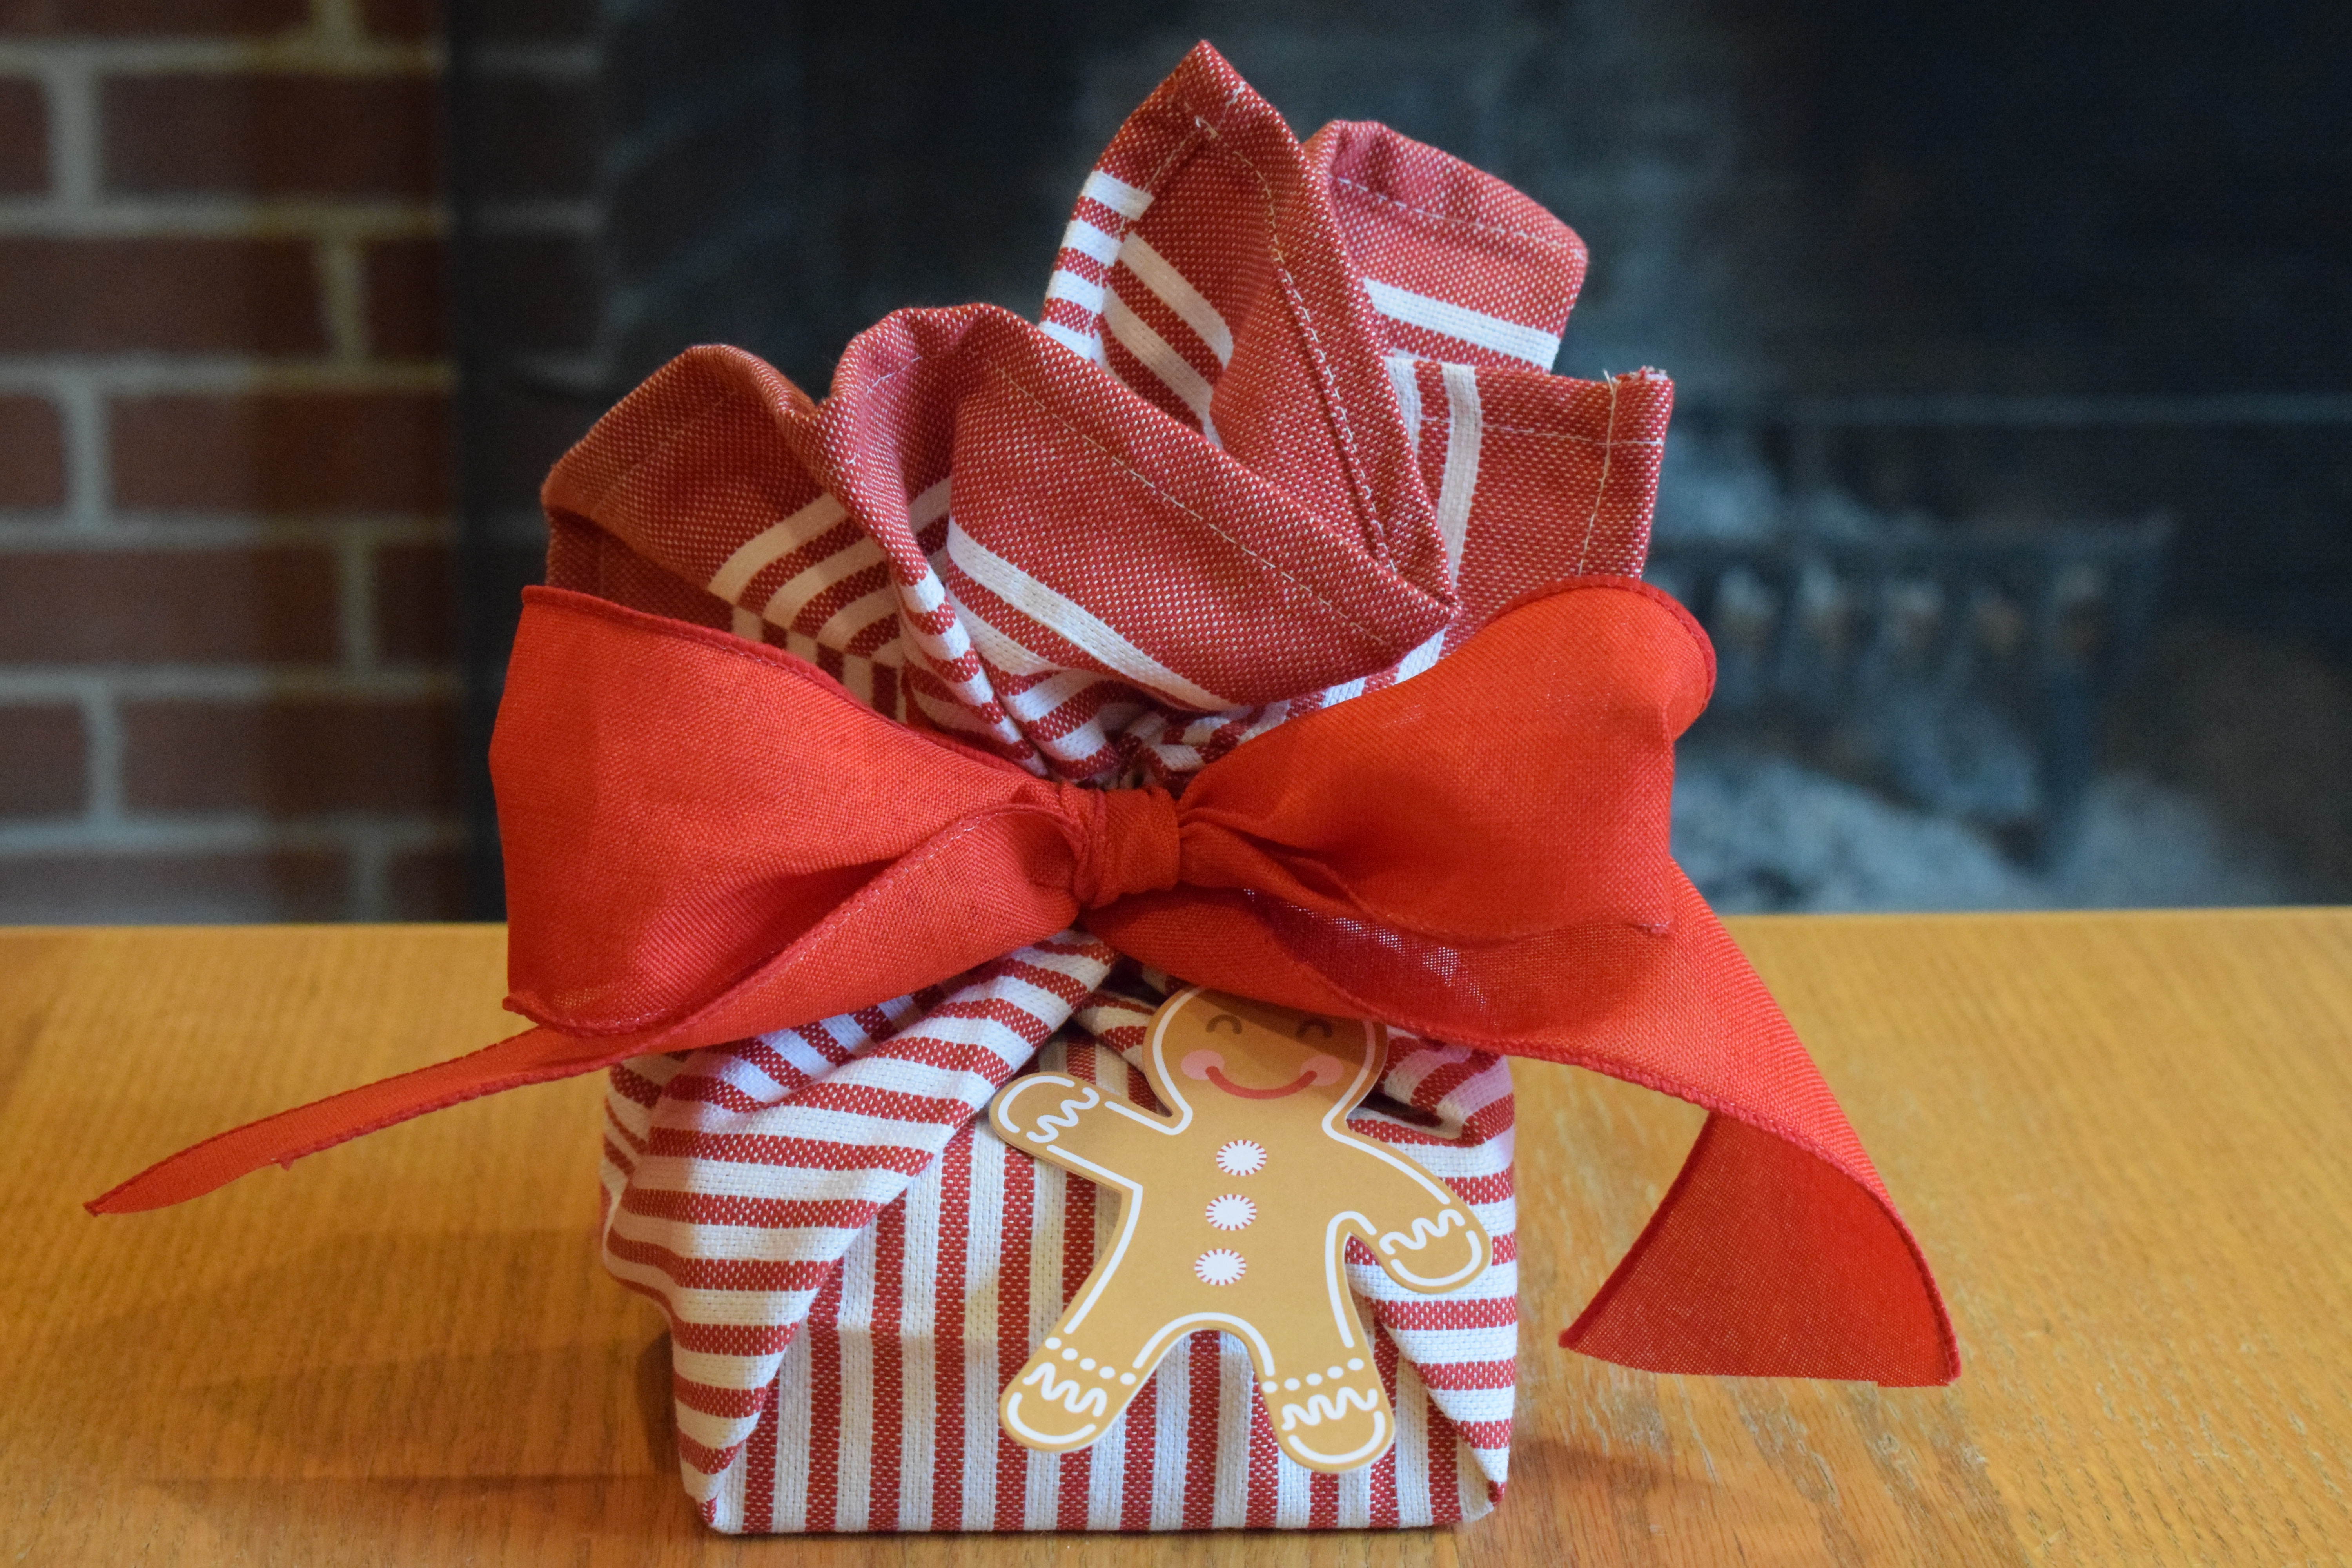 How to Wrap Gifts in Kitchen Towels Step Three Tie Ribbon, Reusable Gift Wrapping